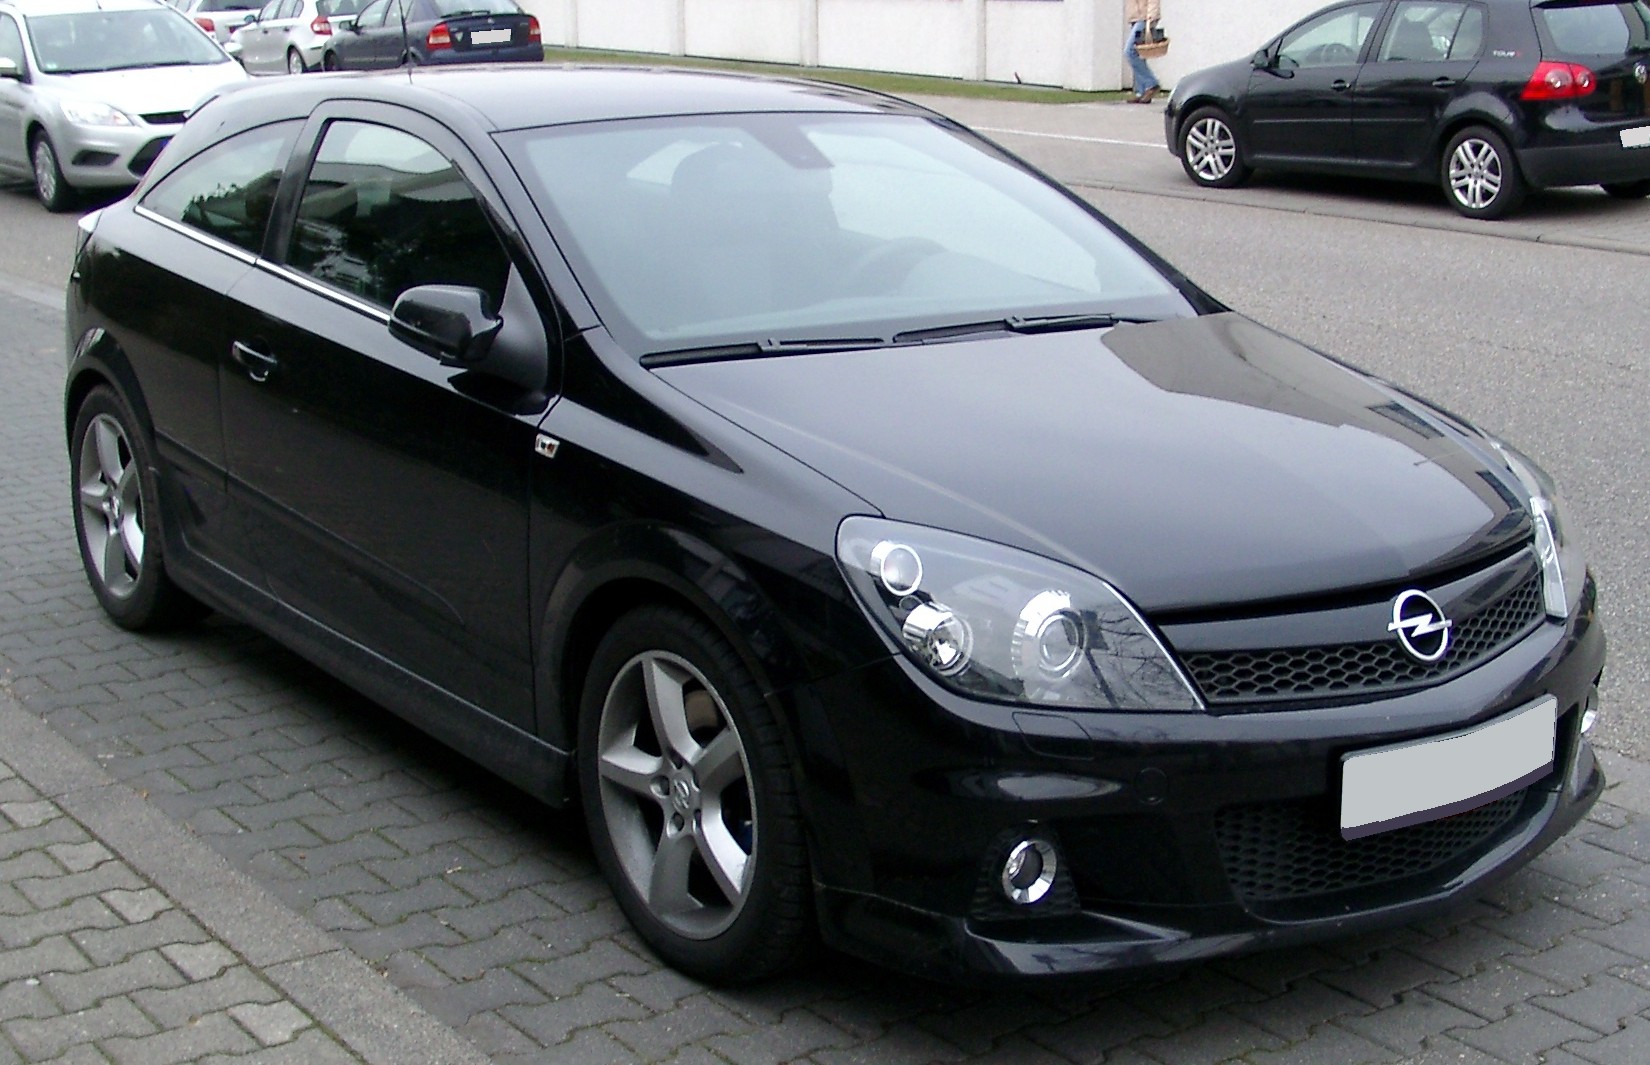 View Of Opel Astra Opc Photos Video Features And Tuning Of Vehicles Gr8autophoto Com